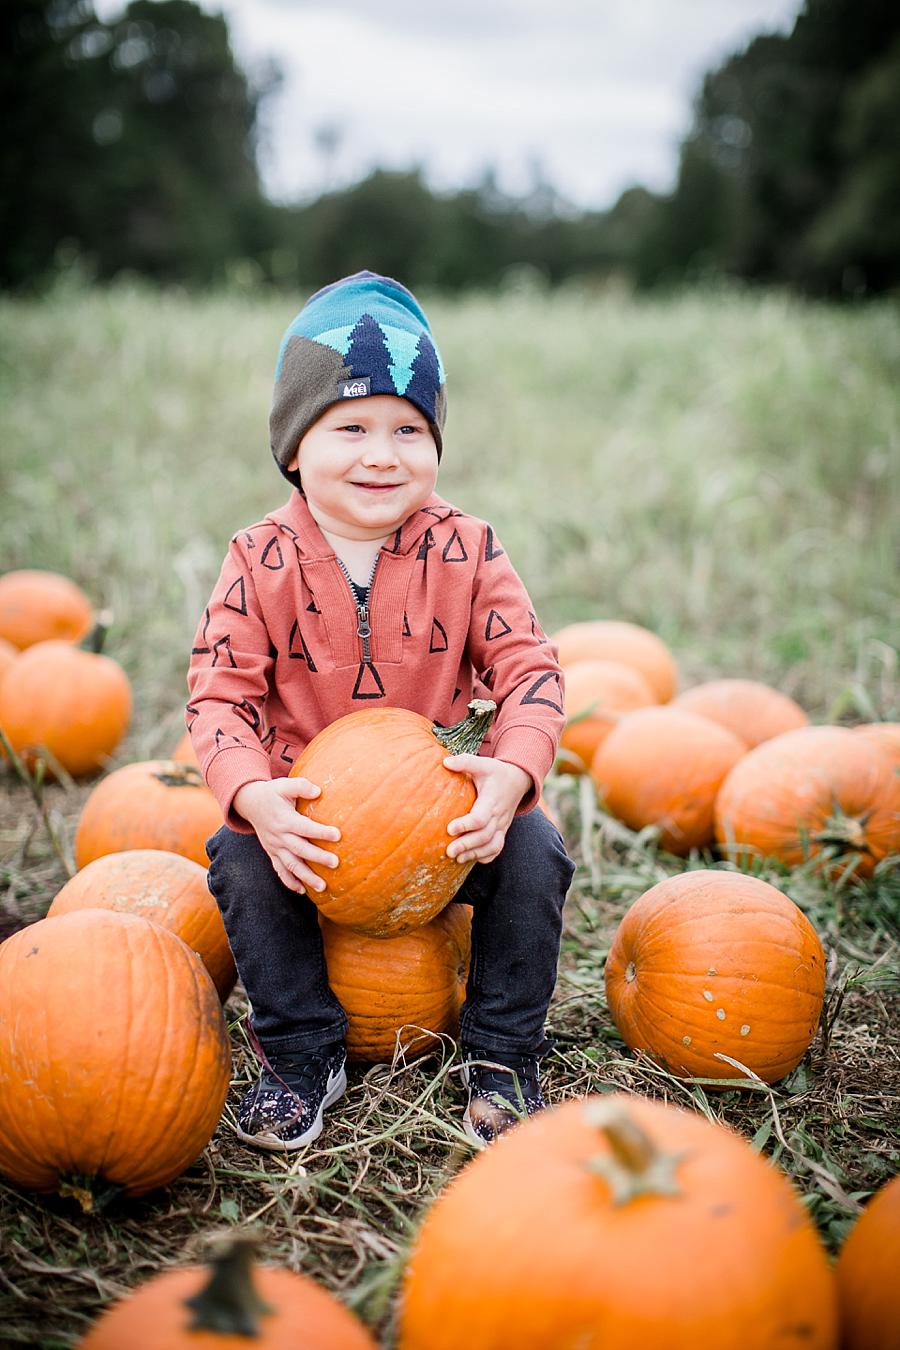 Holding a pumpkin at this Oakes Farm Session by Knoxville Wedding Photographer, Amanda May Photos.